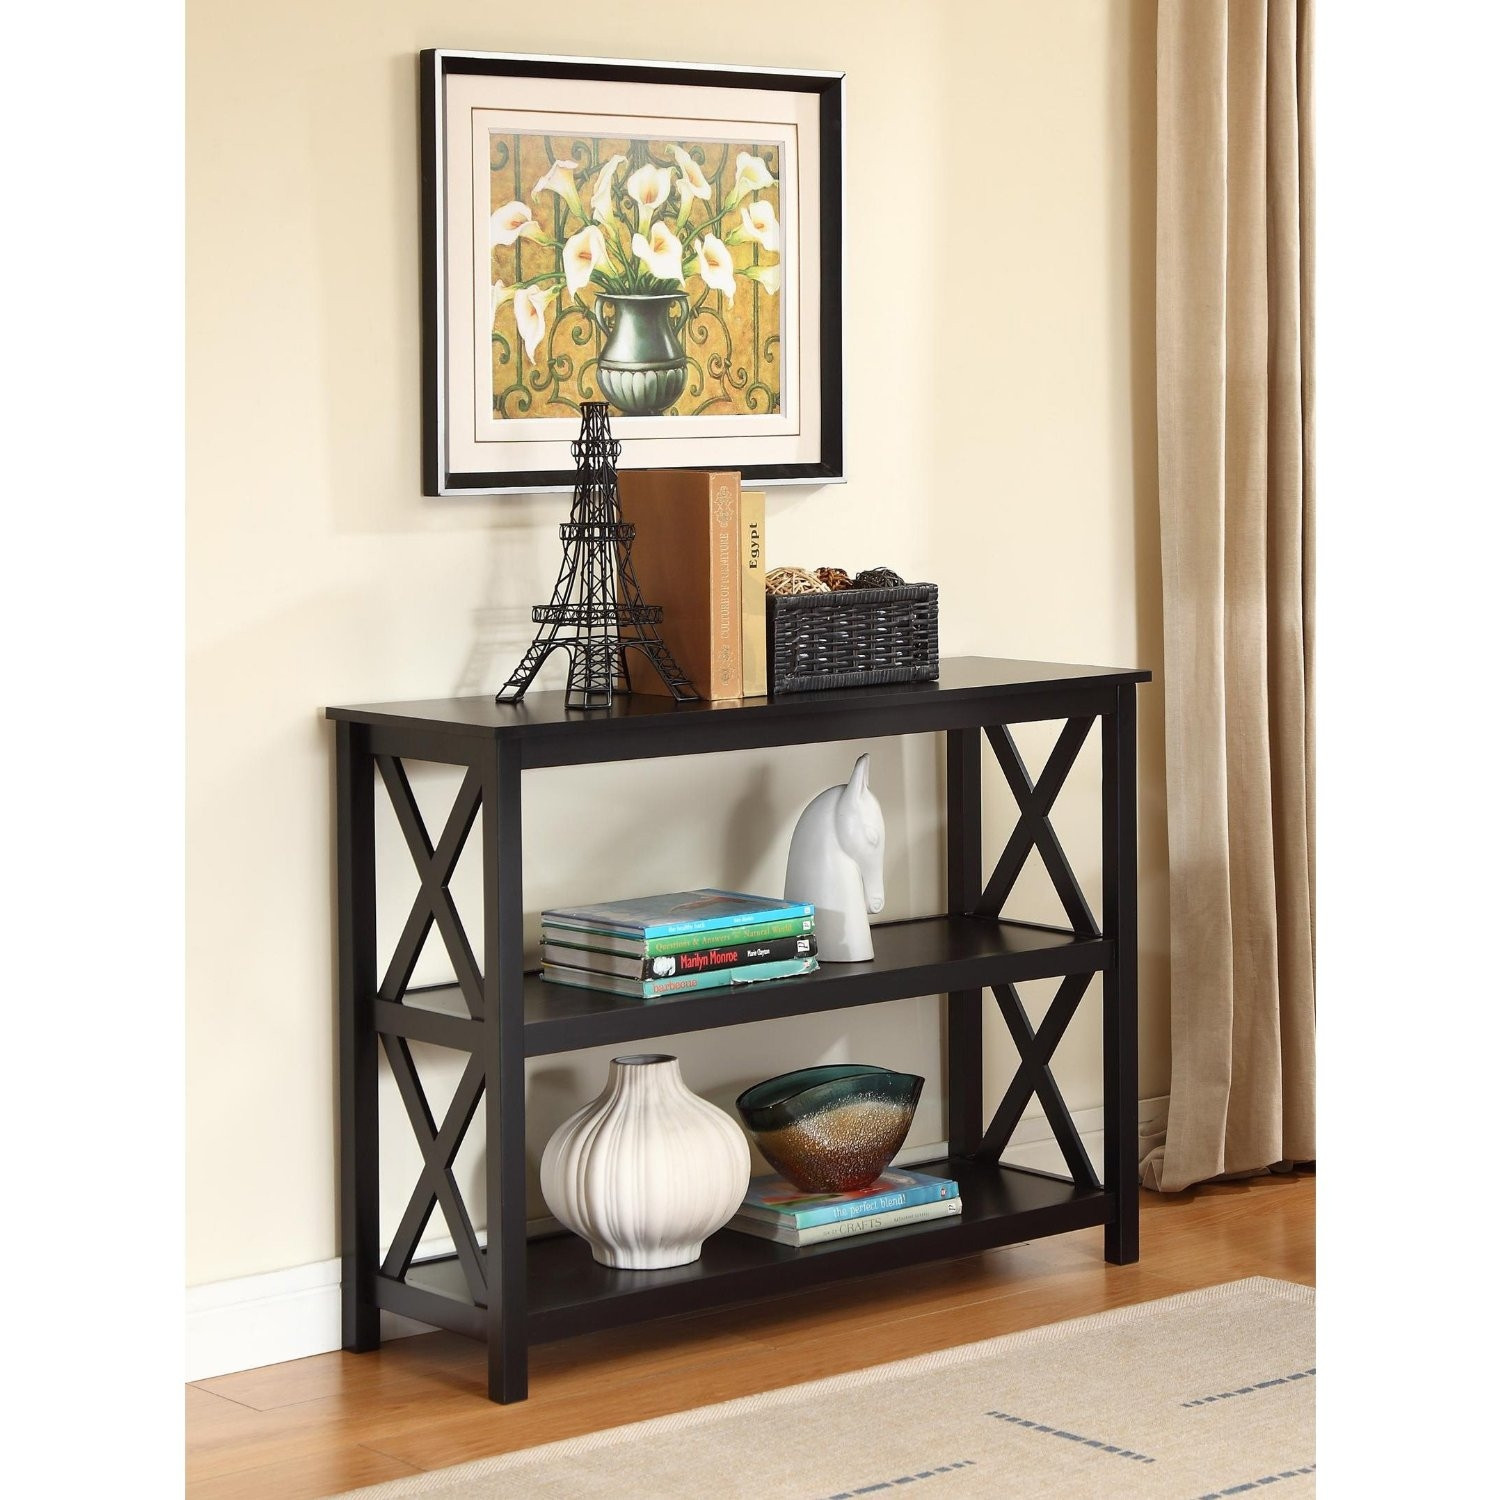 Living Room Console Table
 3 Tier Black Sofa Table Bookcase Living Room Shelves